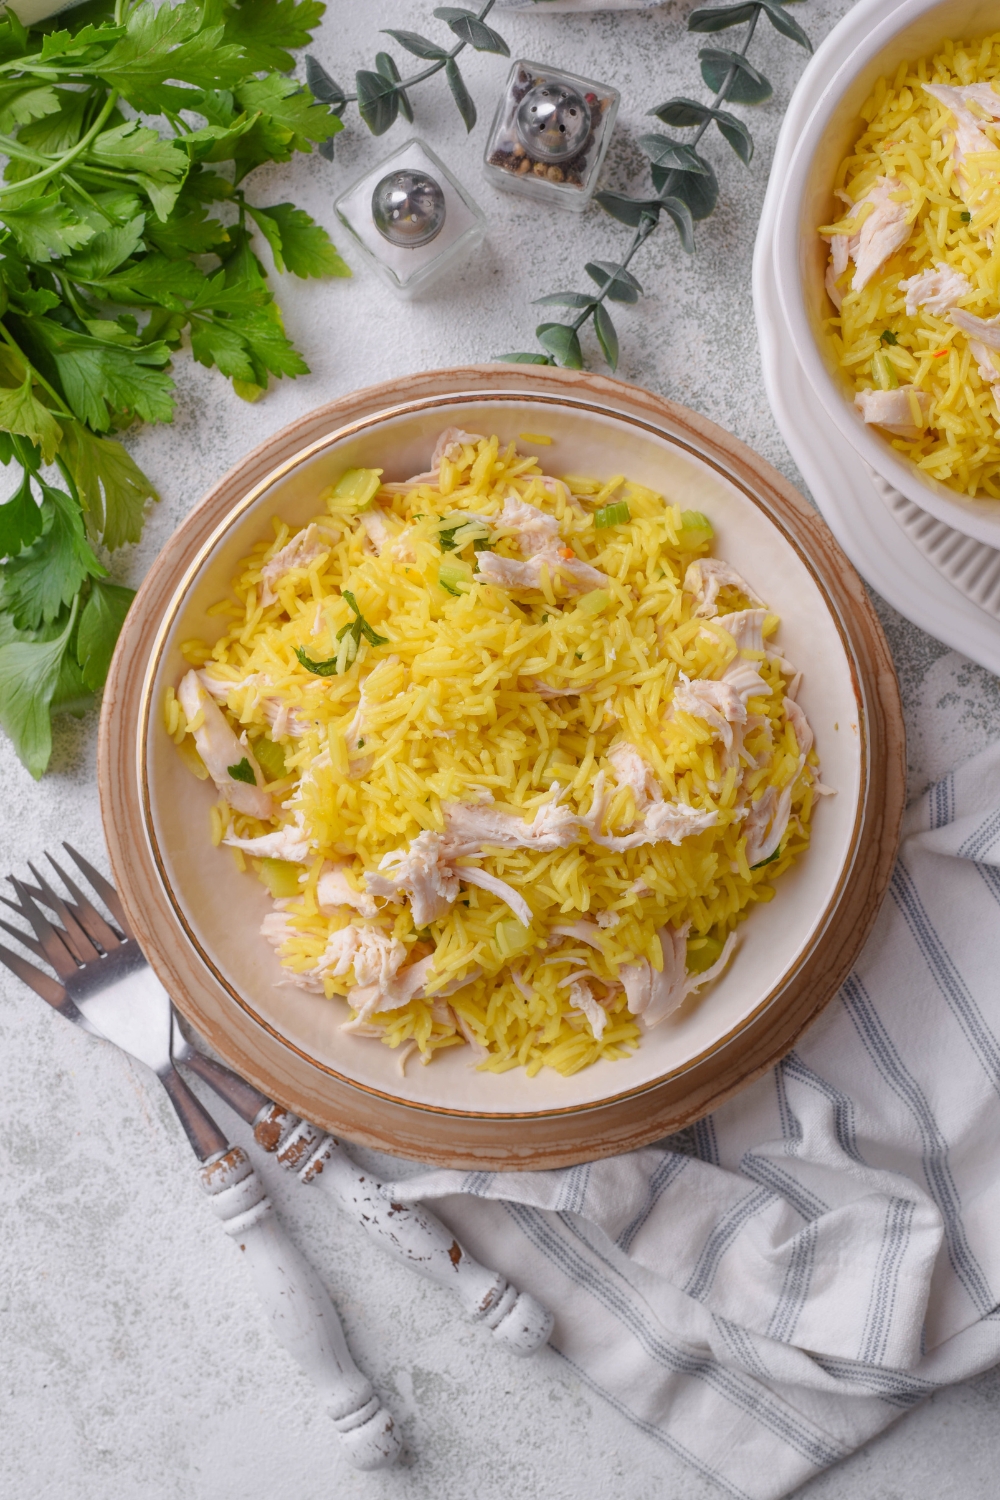 Overhead view of a bowl of yellow rice and shredded chicken mixed together. A second bowl of chicken and rice is next to it along with two forks.